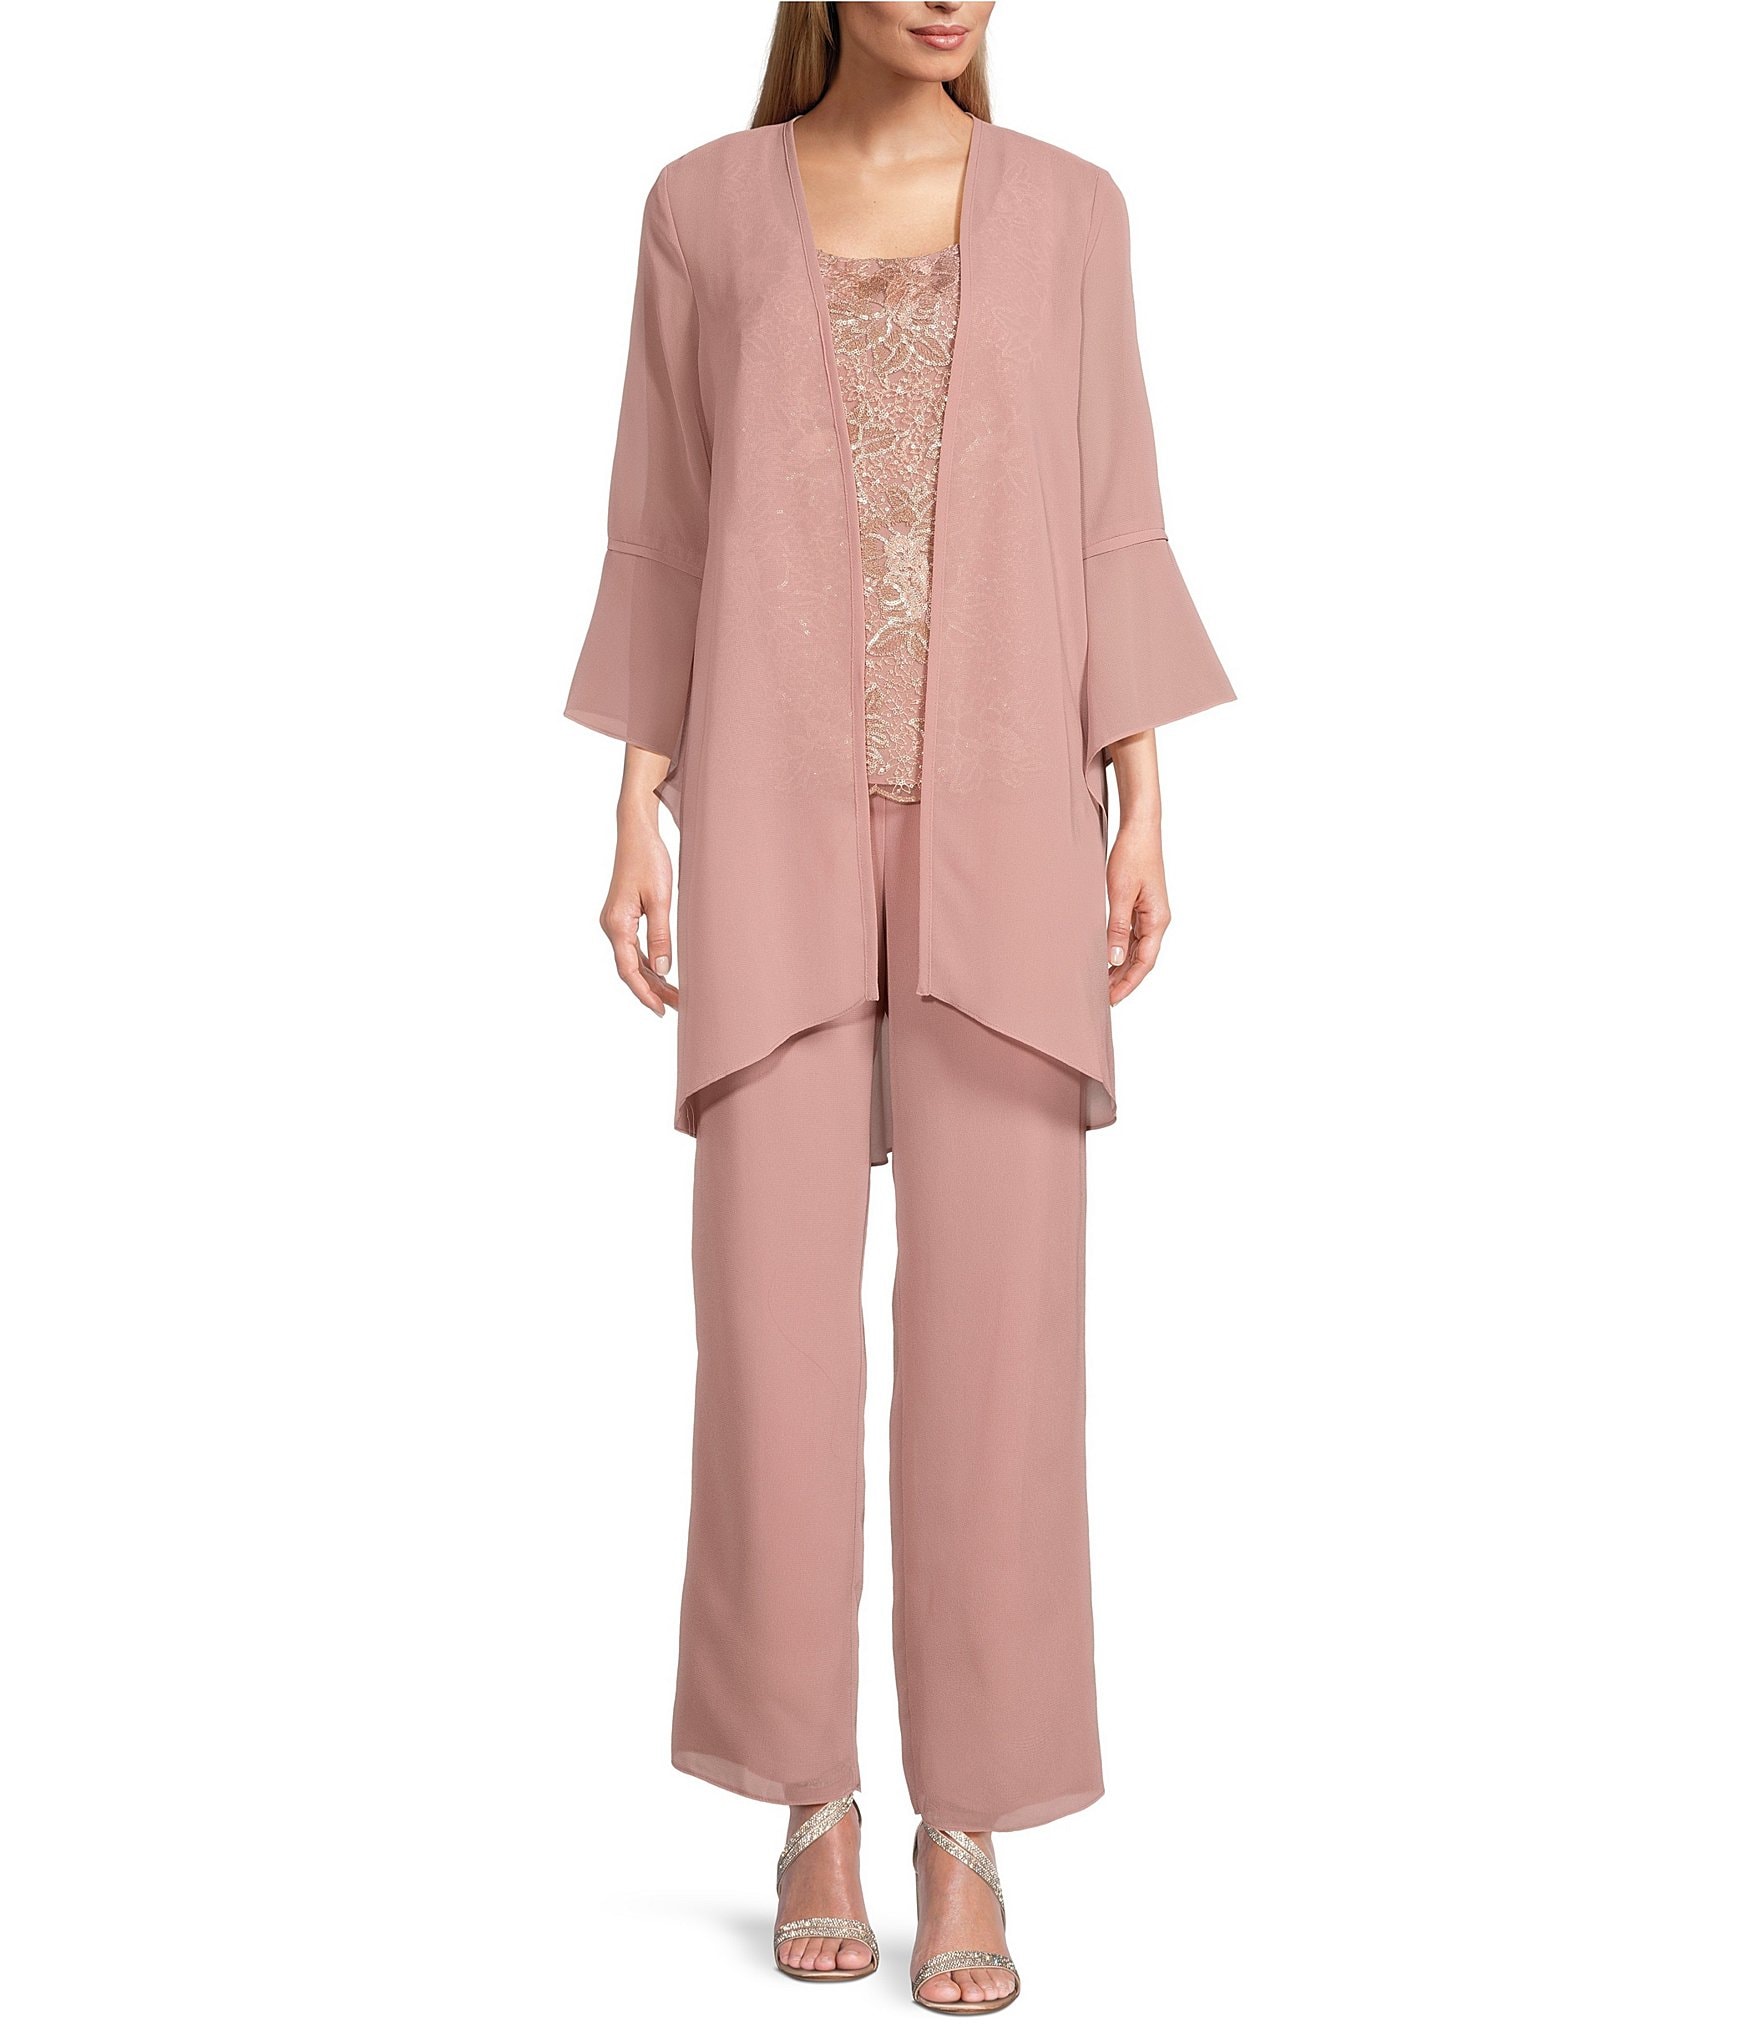 Petite Women's Crinkle Duster Pant Set - Mother of the Bride Pant suit